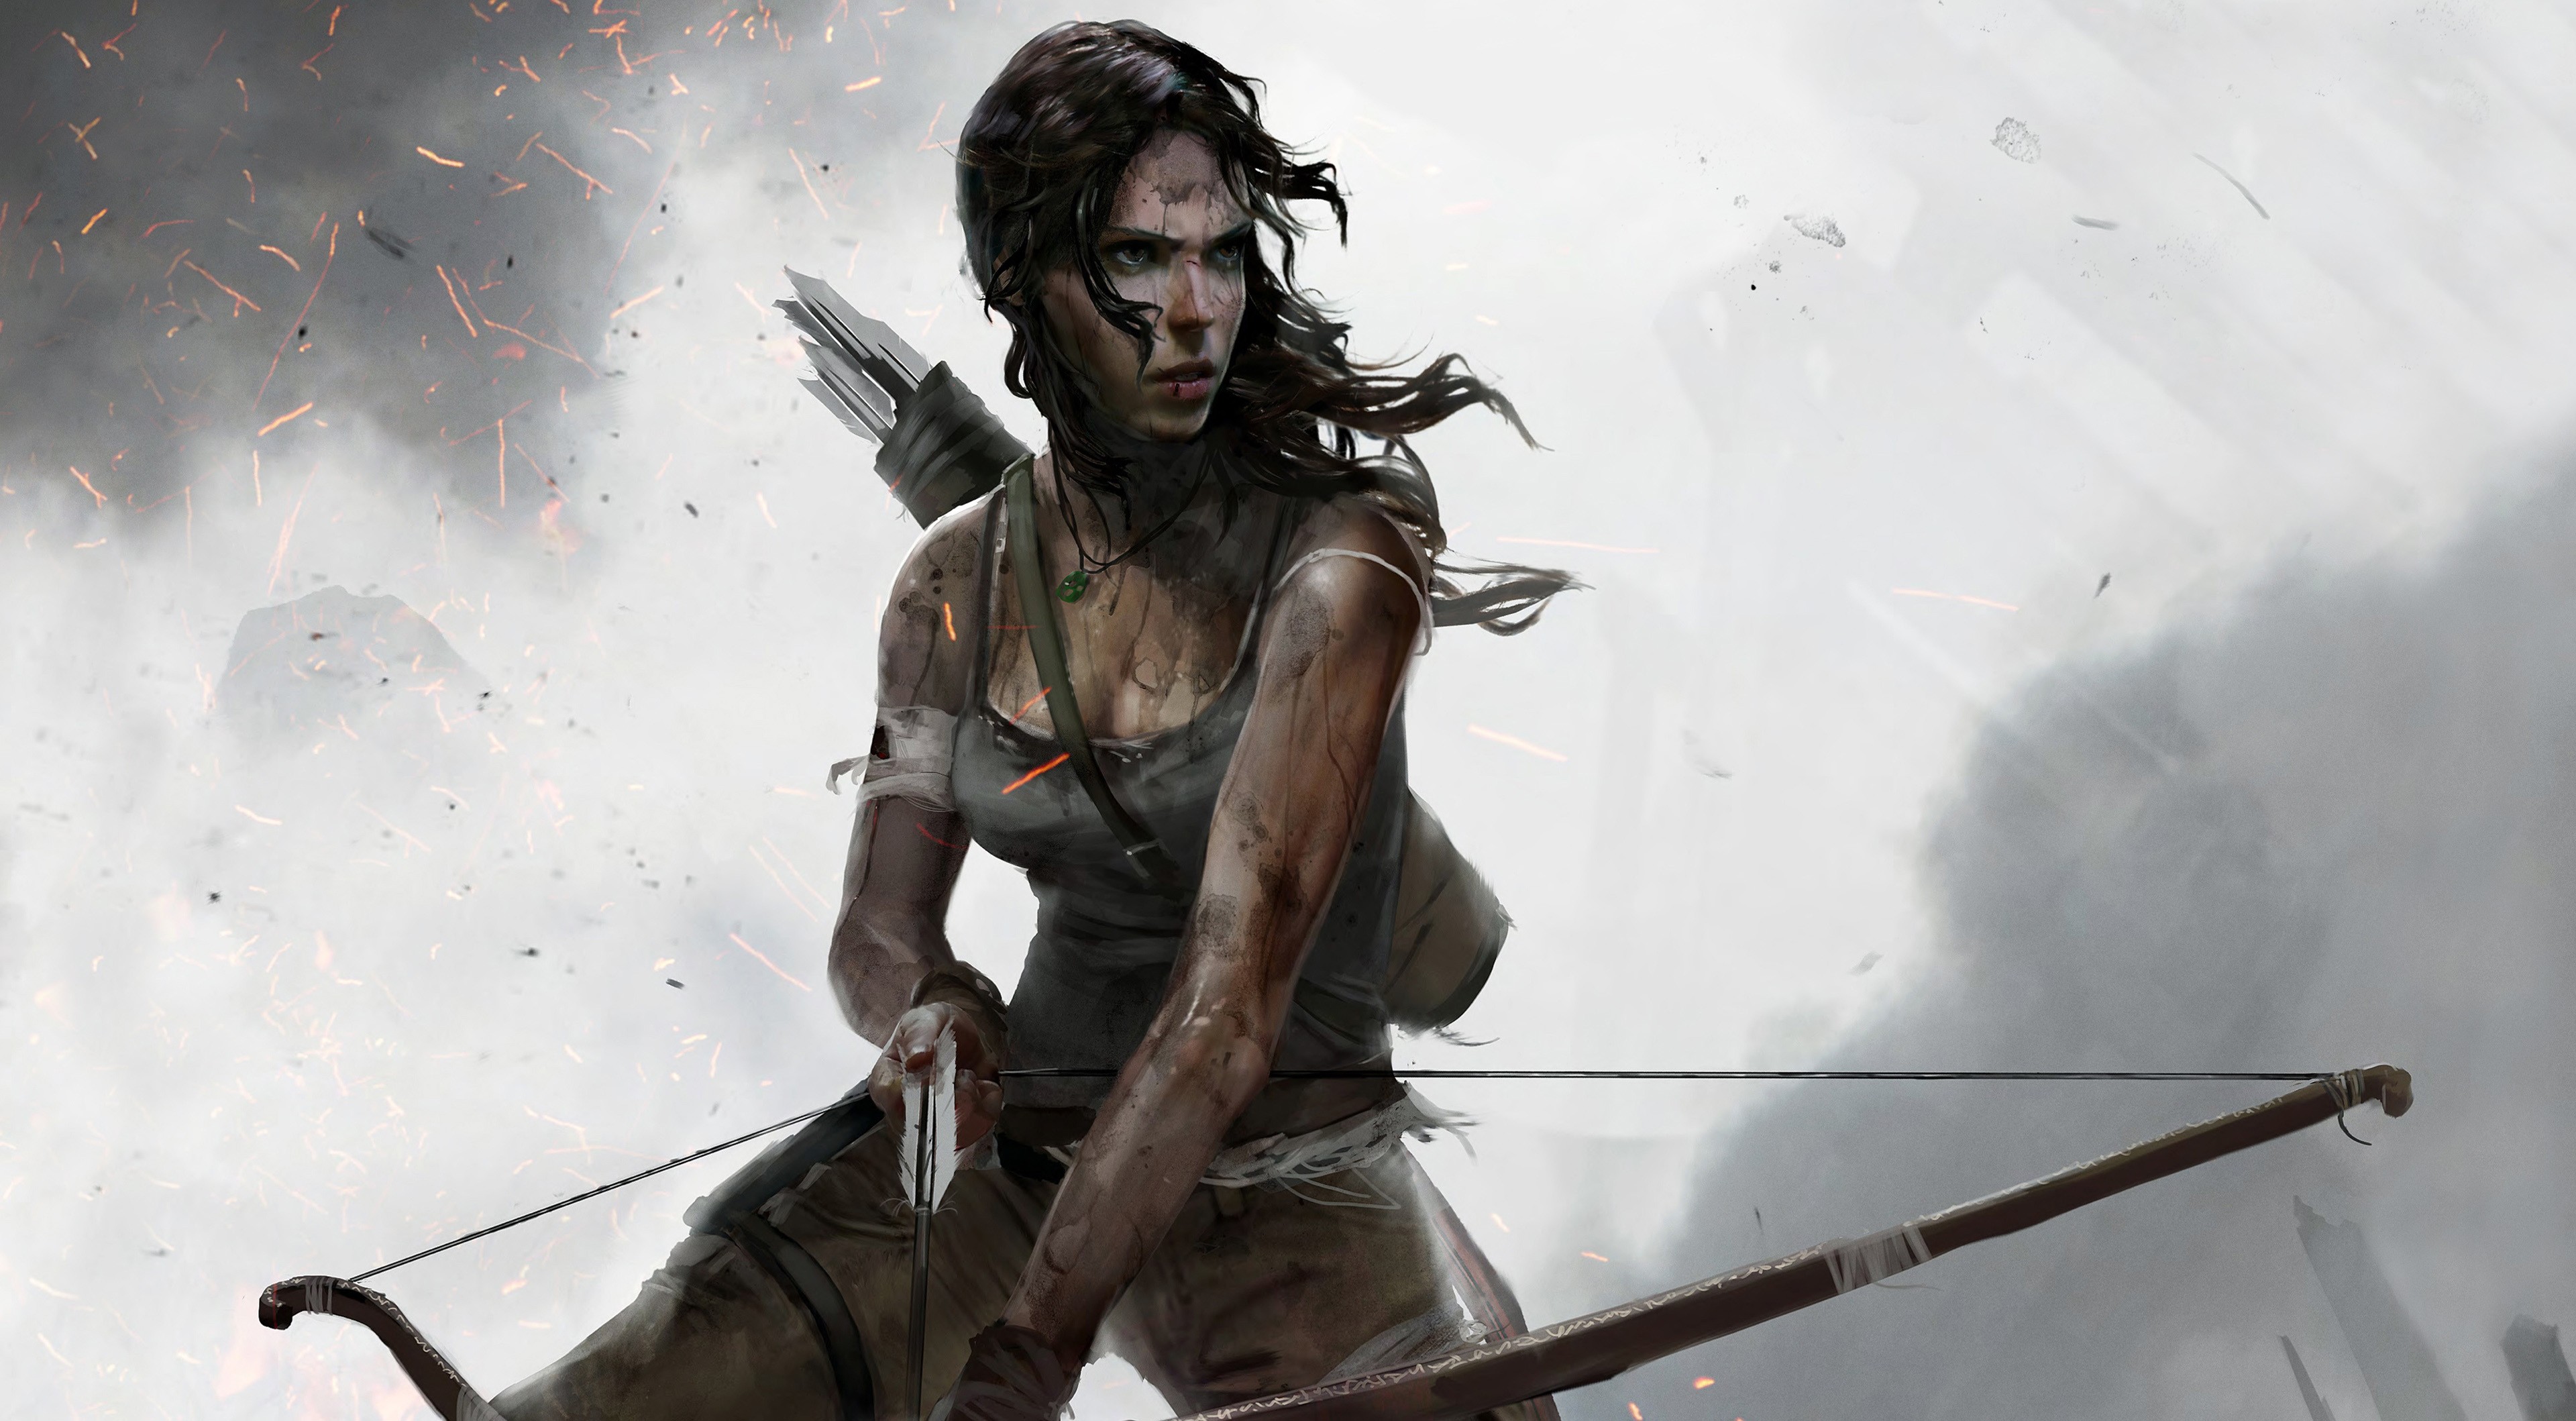 General 3840x2118 Tomb Raider video games bow video game art video game girls wounds blood looking into the distance PC gaming dark hair dirt necklace women standing Lara Croft (Tomb Raider) bow and arrow video game characters